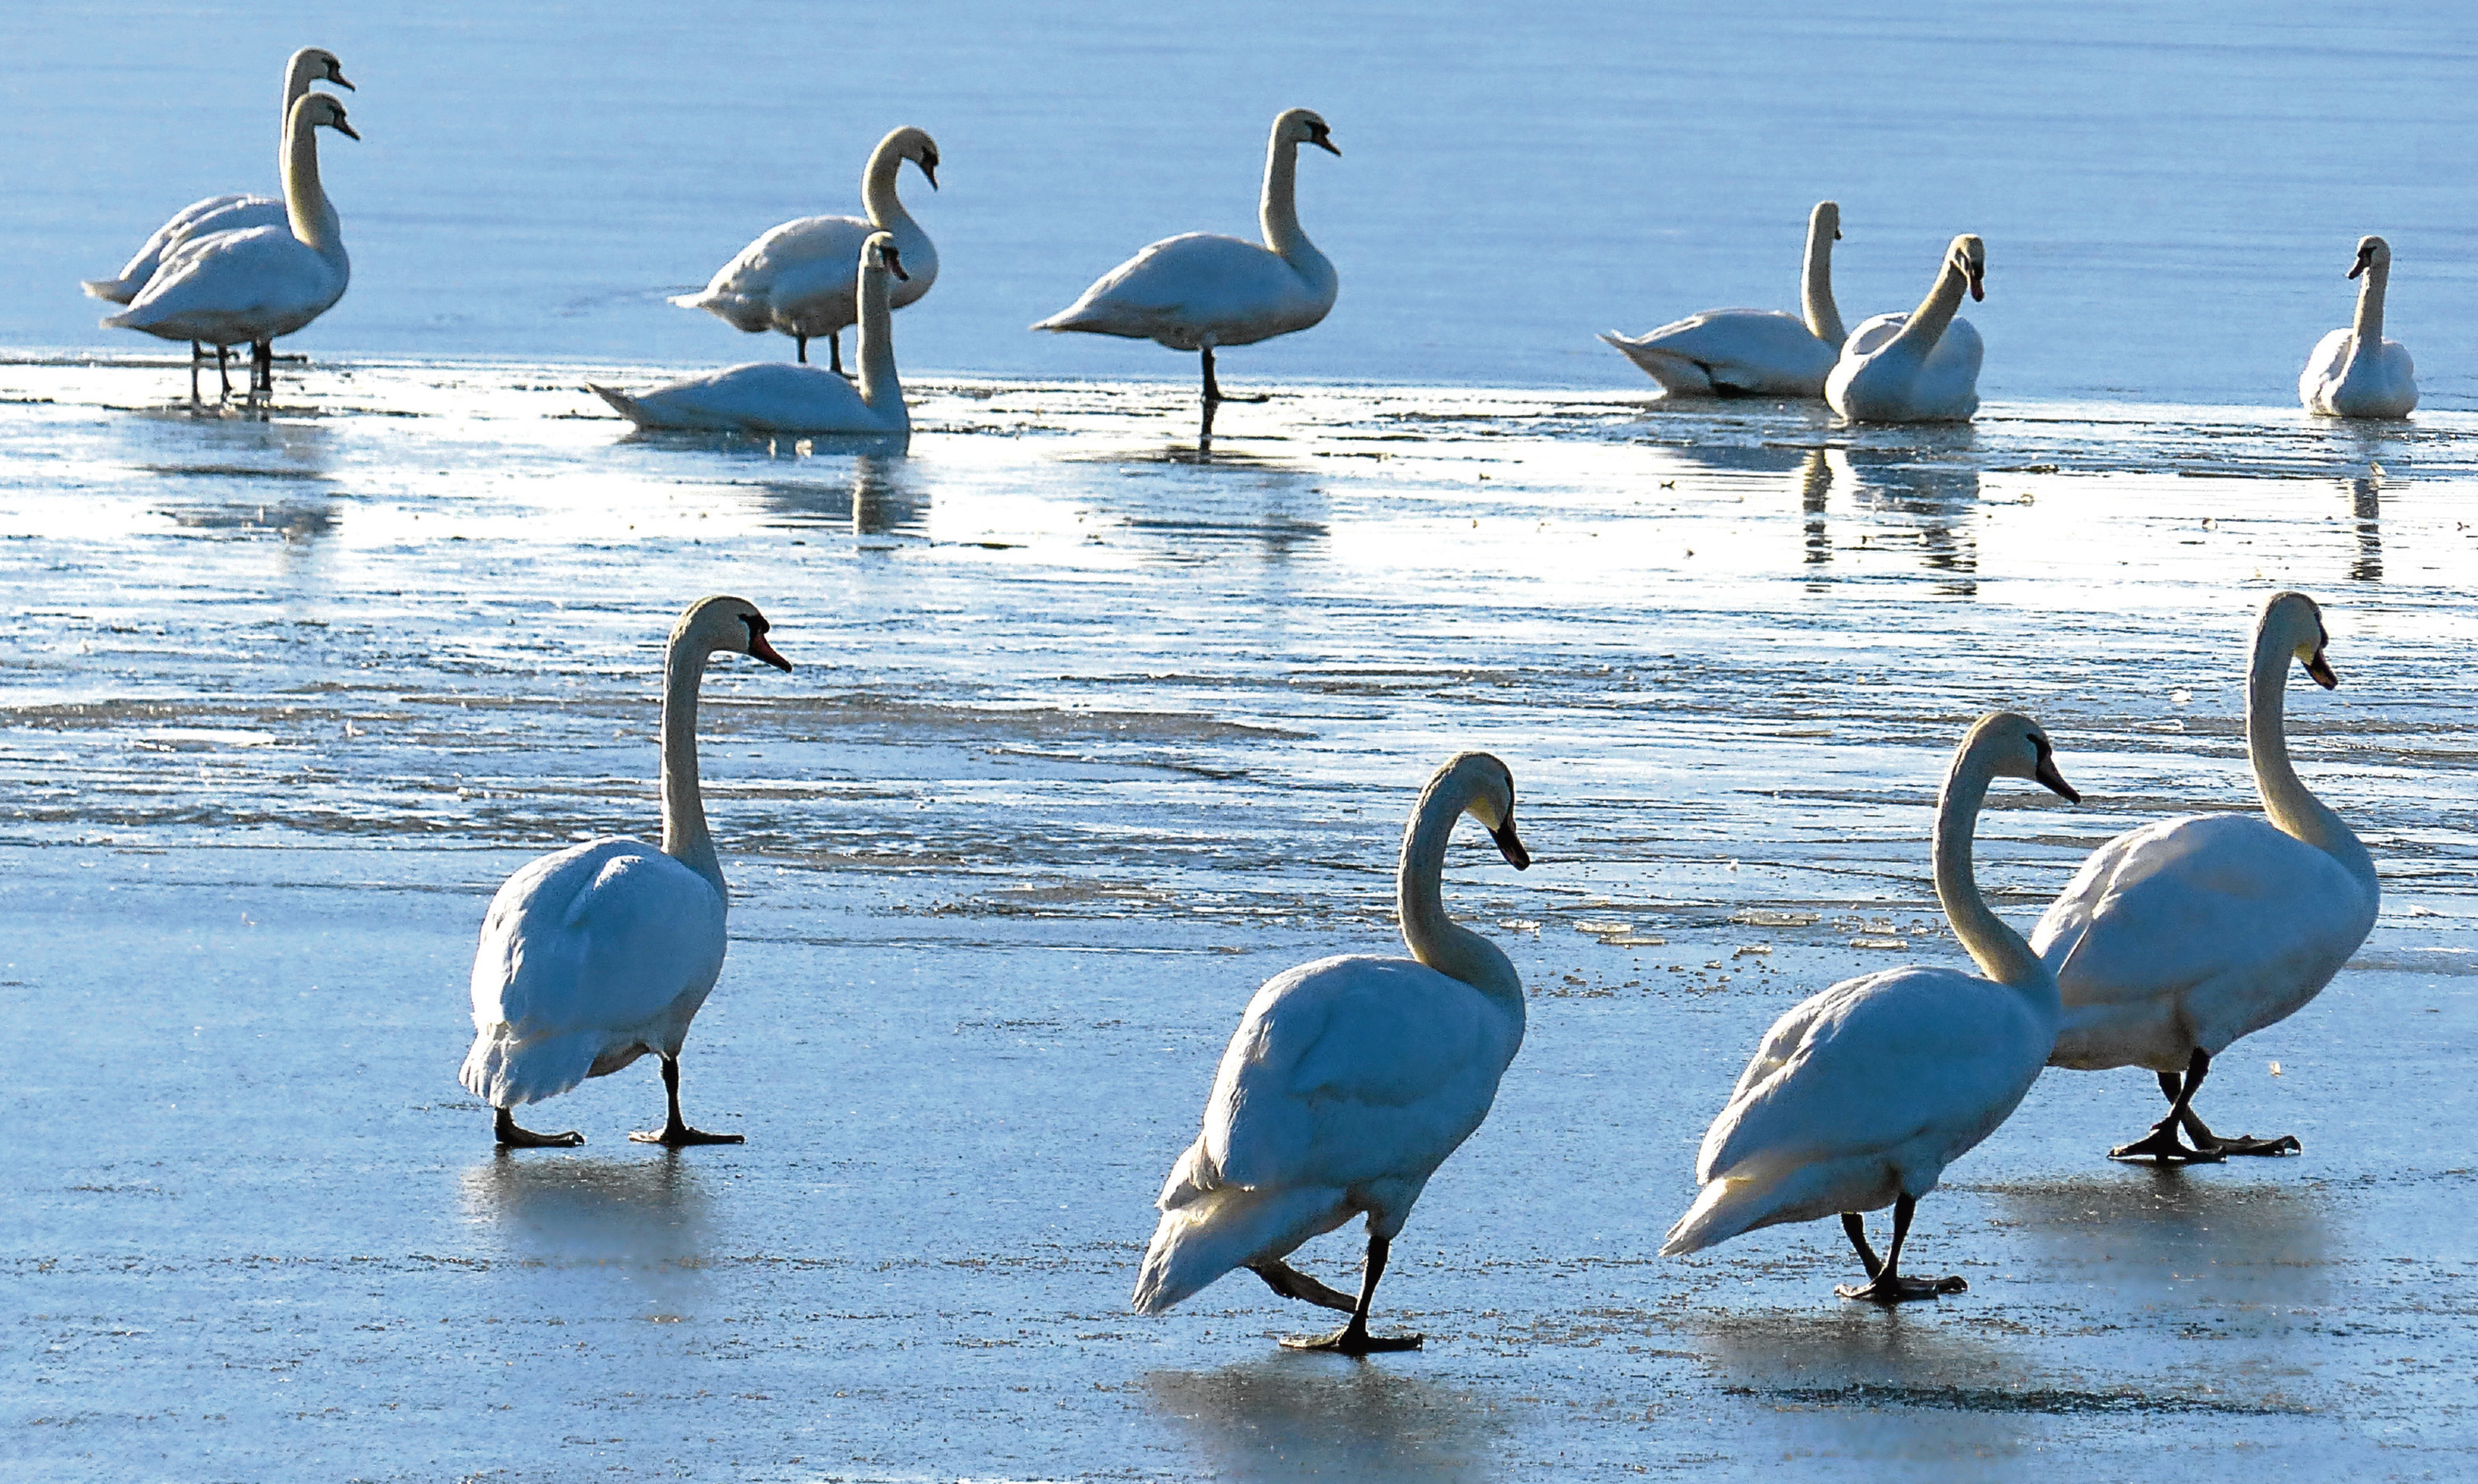 Swans on a frozen Loch Leven, yet none of them are white, showing Jim's fascination with the way artists see the world differently.